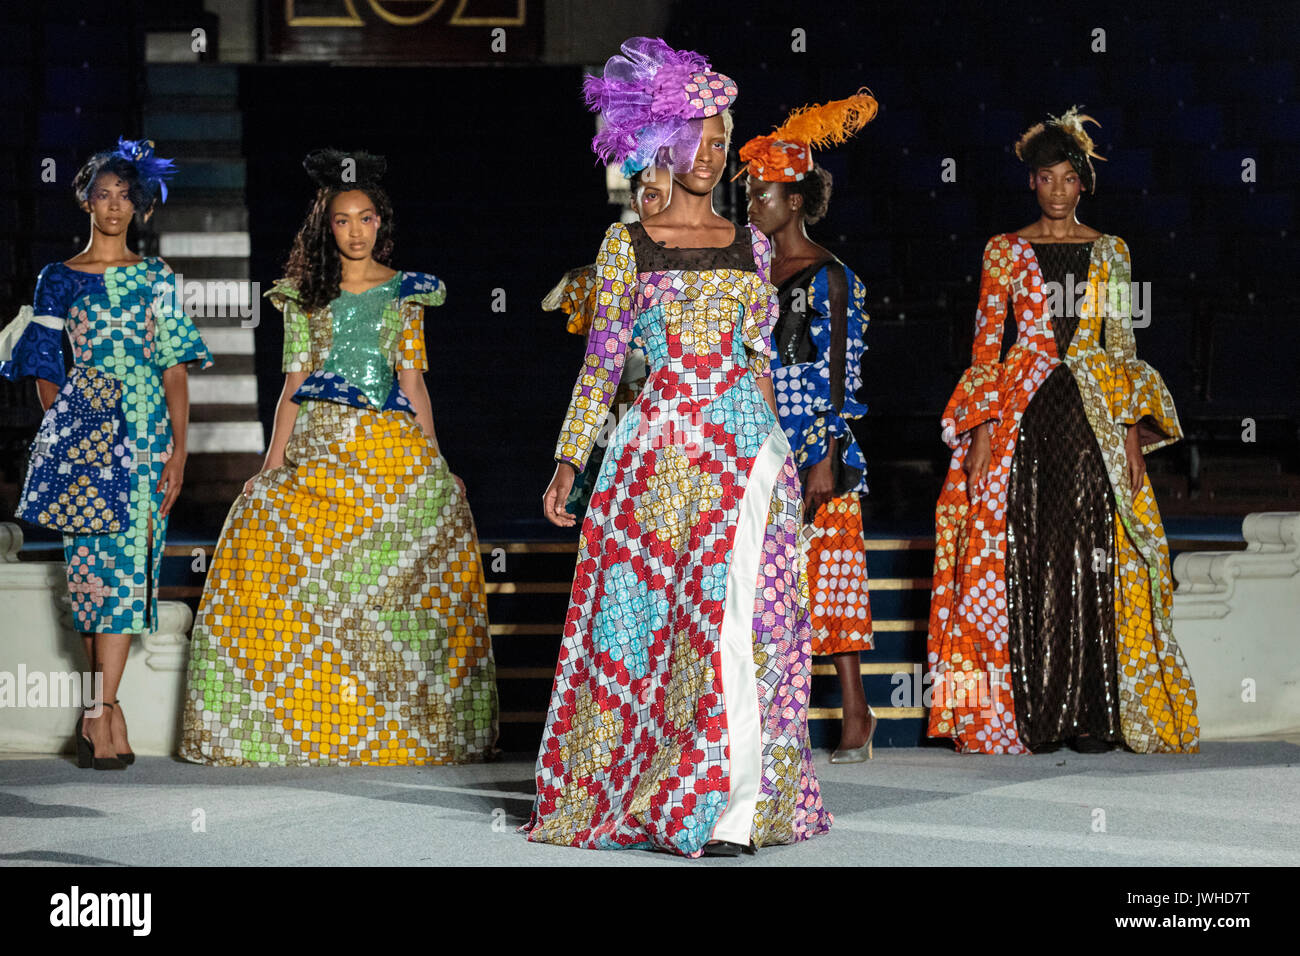 London, UK. 12th Aug, 2017. Day 2, Show 1. The Luvita Creations designs are presented by models on the runway. This show features designs by Jutu, Becca Apparel, Luvita Creations, Abisola Akanni, Atelier Nsoromma, Trish O, Tubo. Valerie Azinge Atelier, Tobams Colours. Since debuting in 2011, the two day Africa Fashion Week London, AFWL, has grown into one of the largest Africa inspired fashion events in Europe. Credit: Imageplotter News and Sports/Alamy Live News Stock Photo